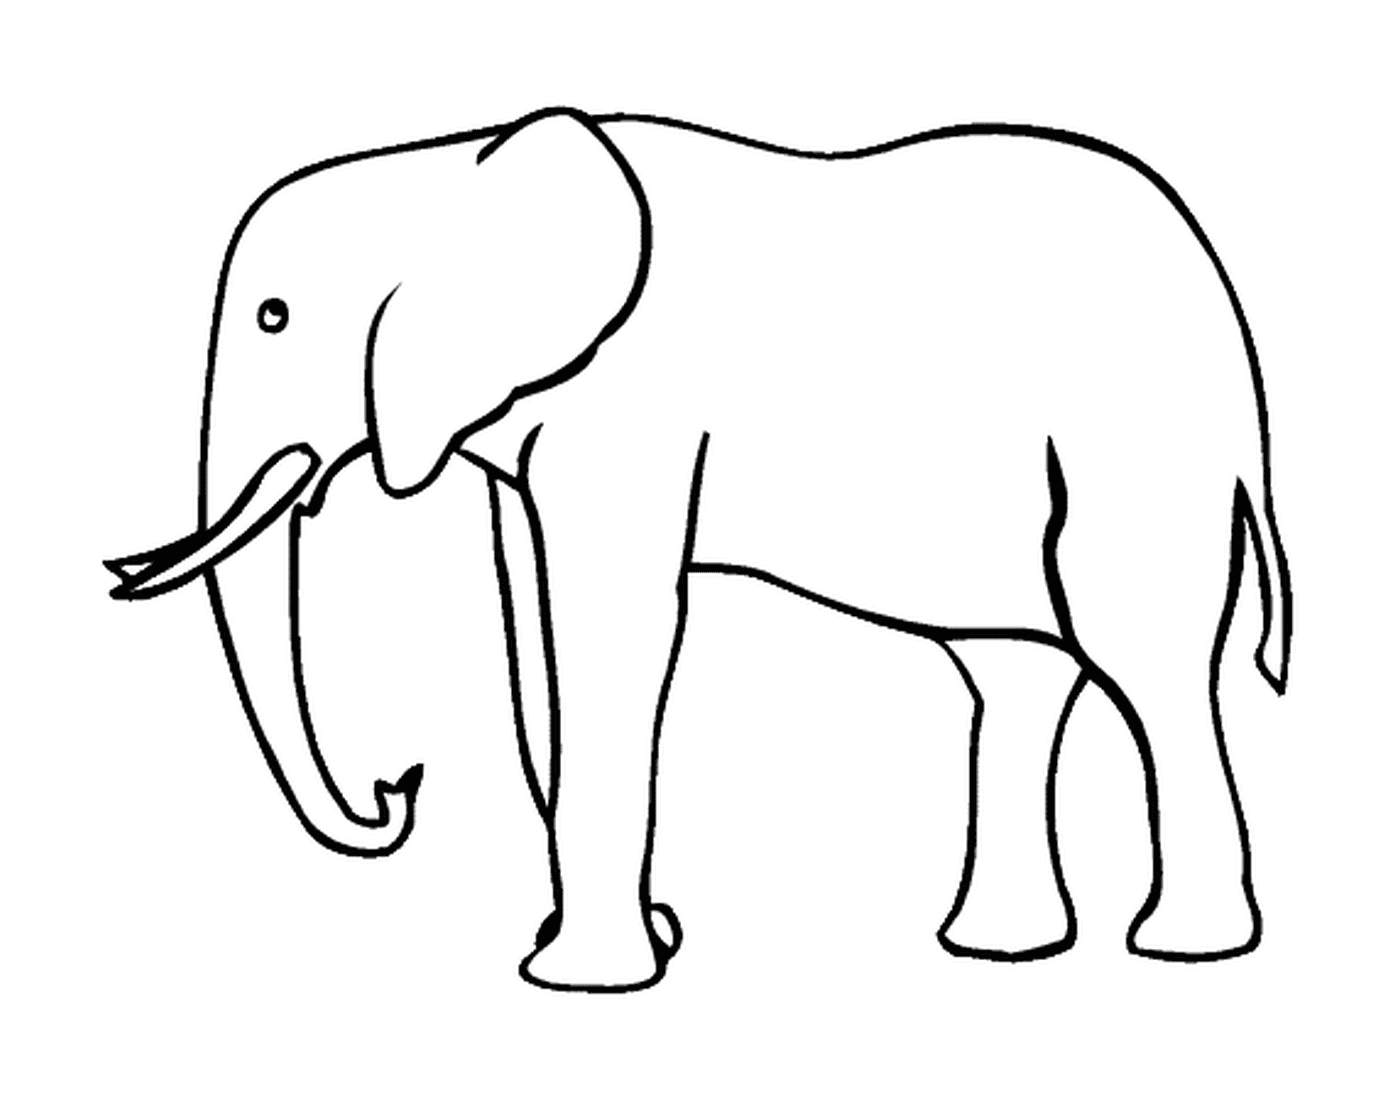  An elephant silhouette with tusks 